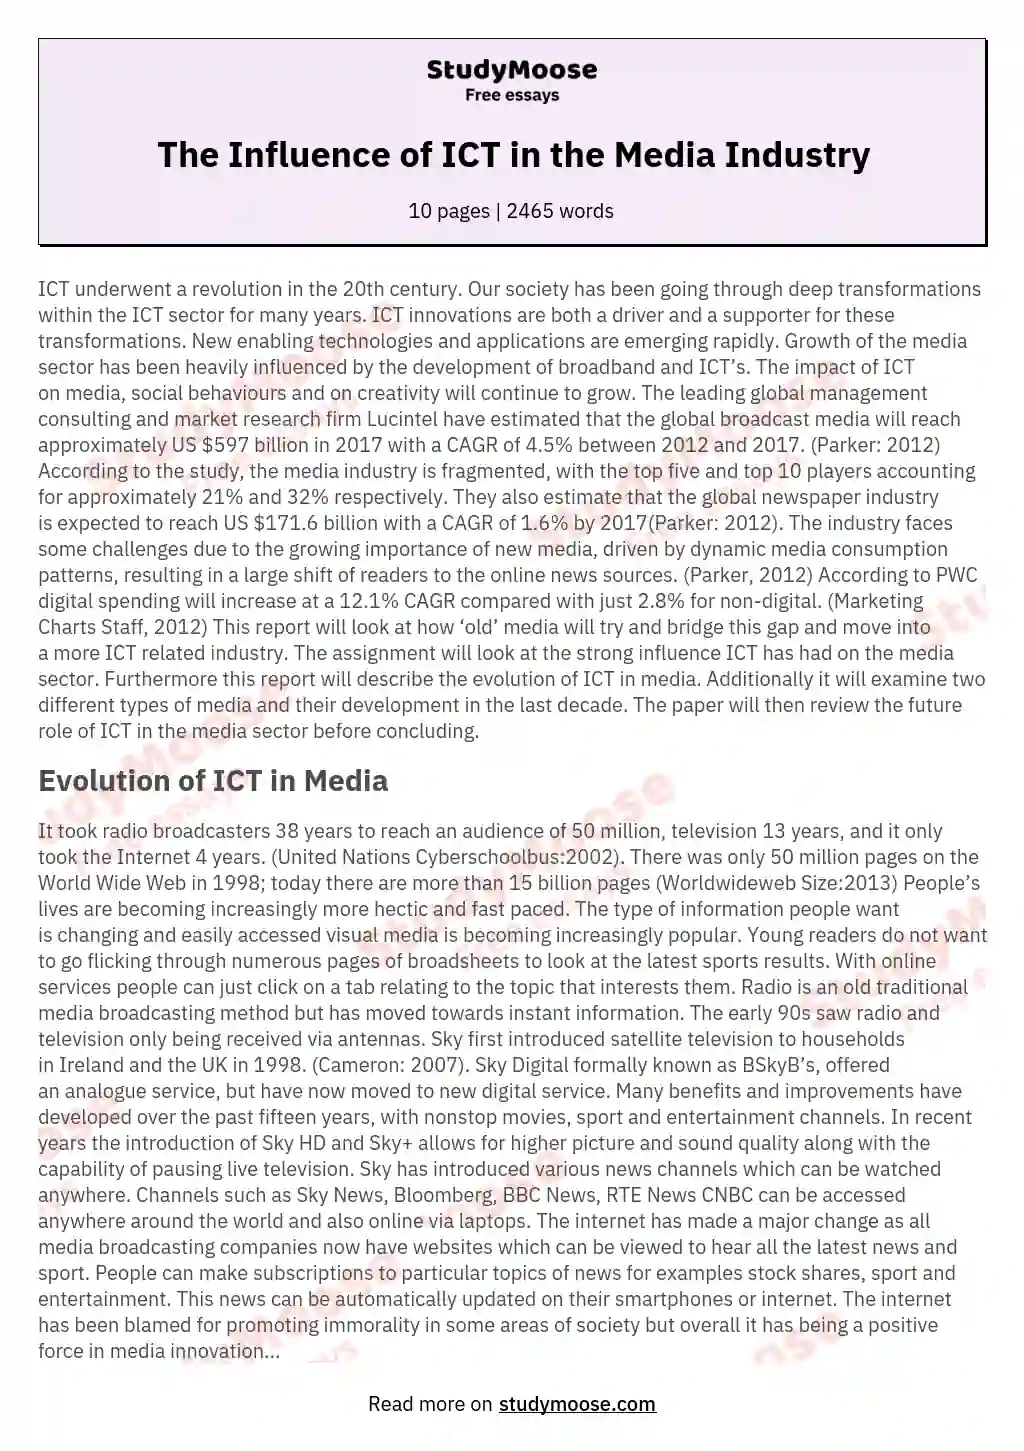 The Influence of ICT in the Media Industry essay